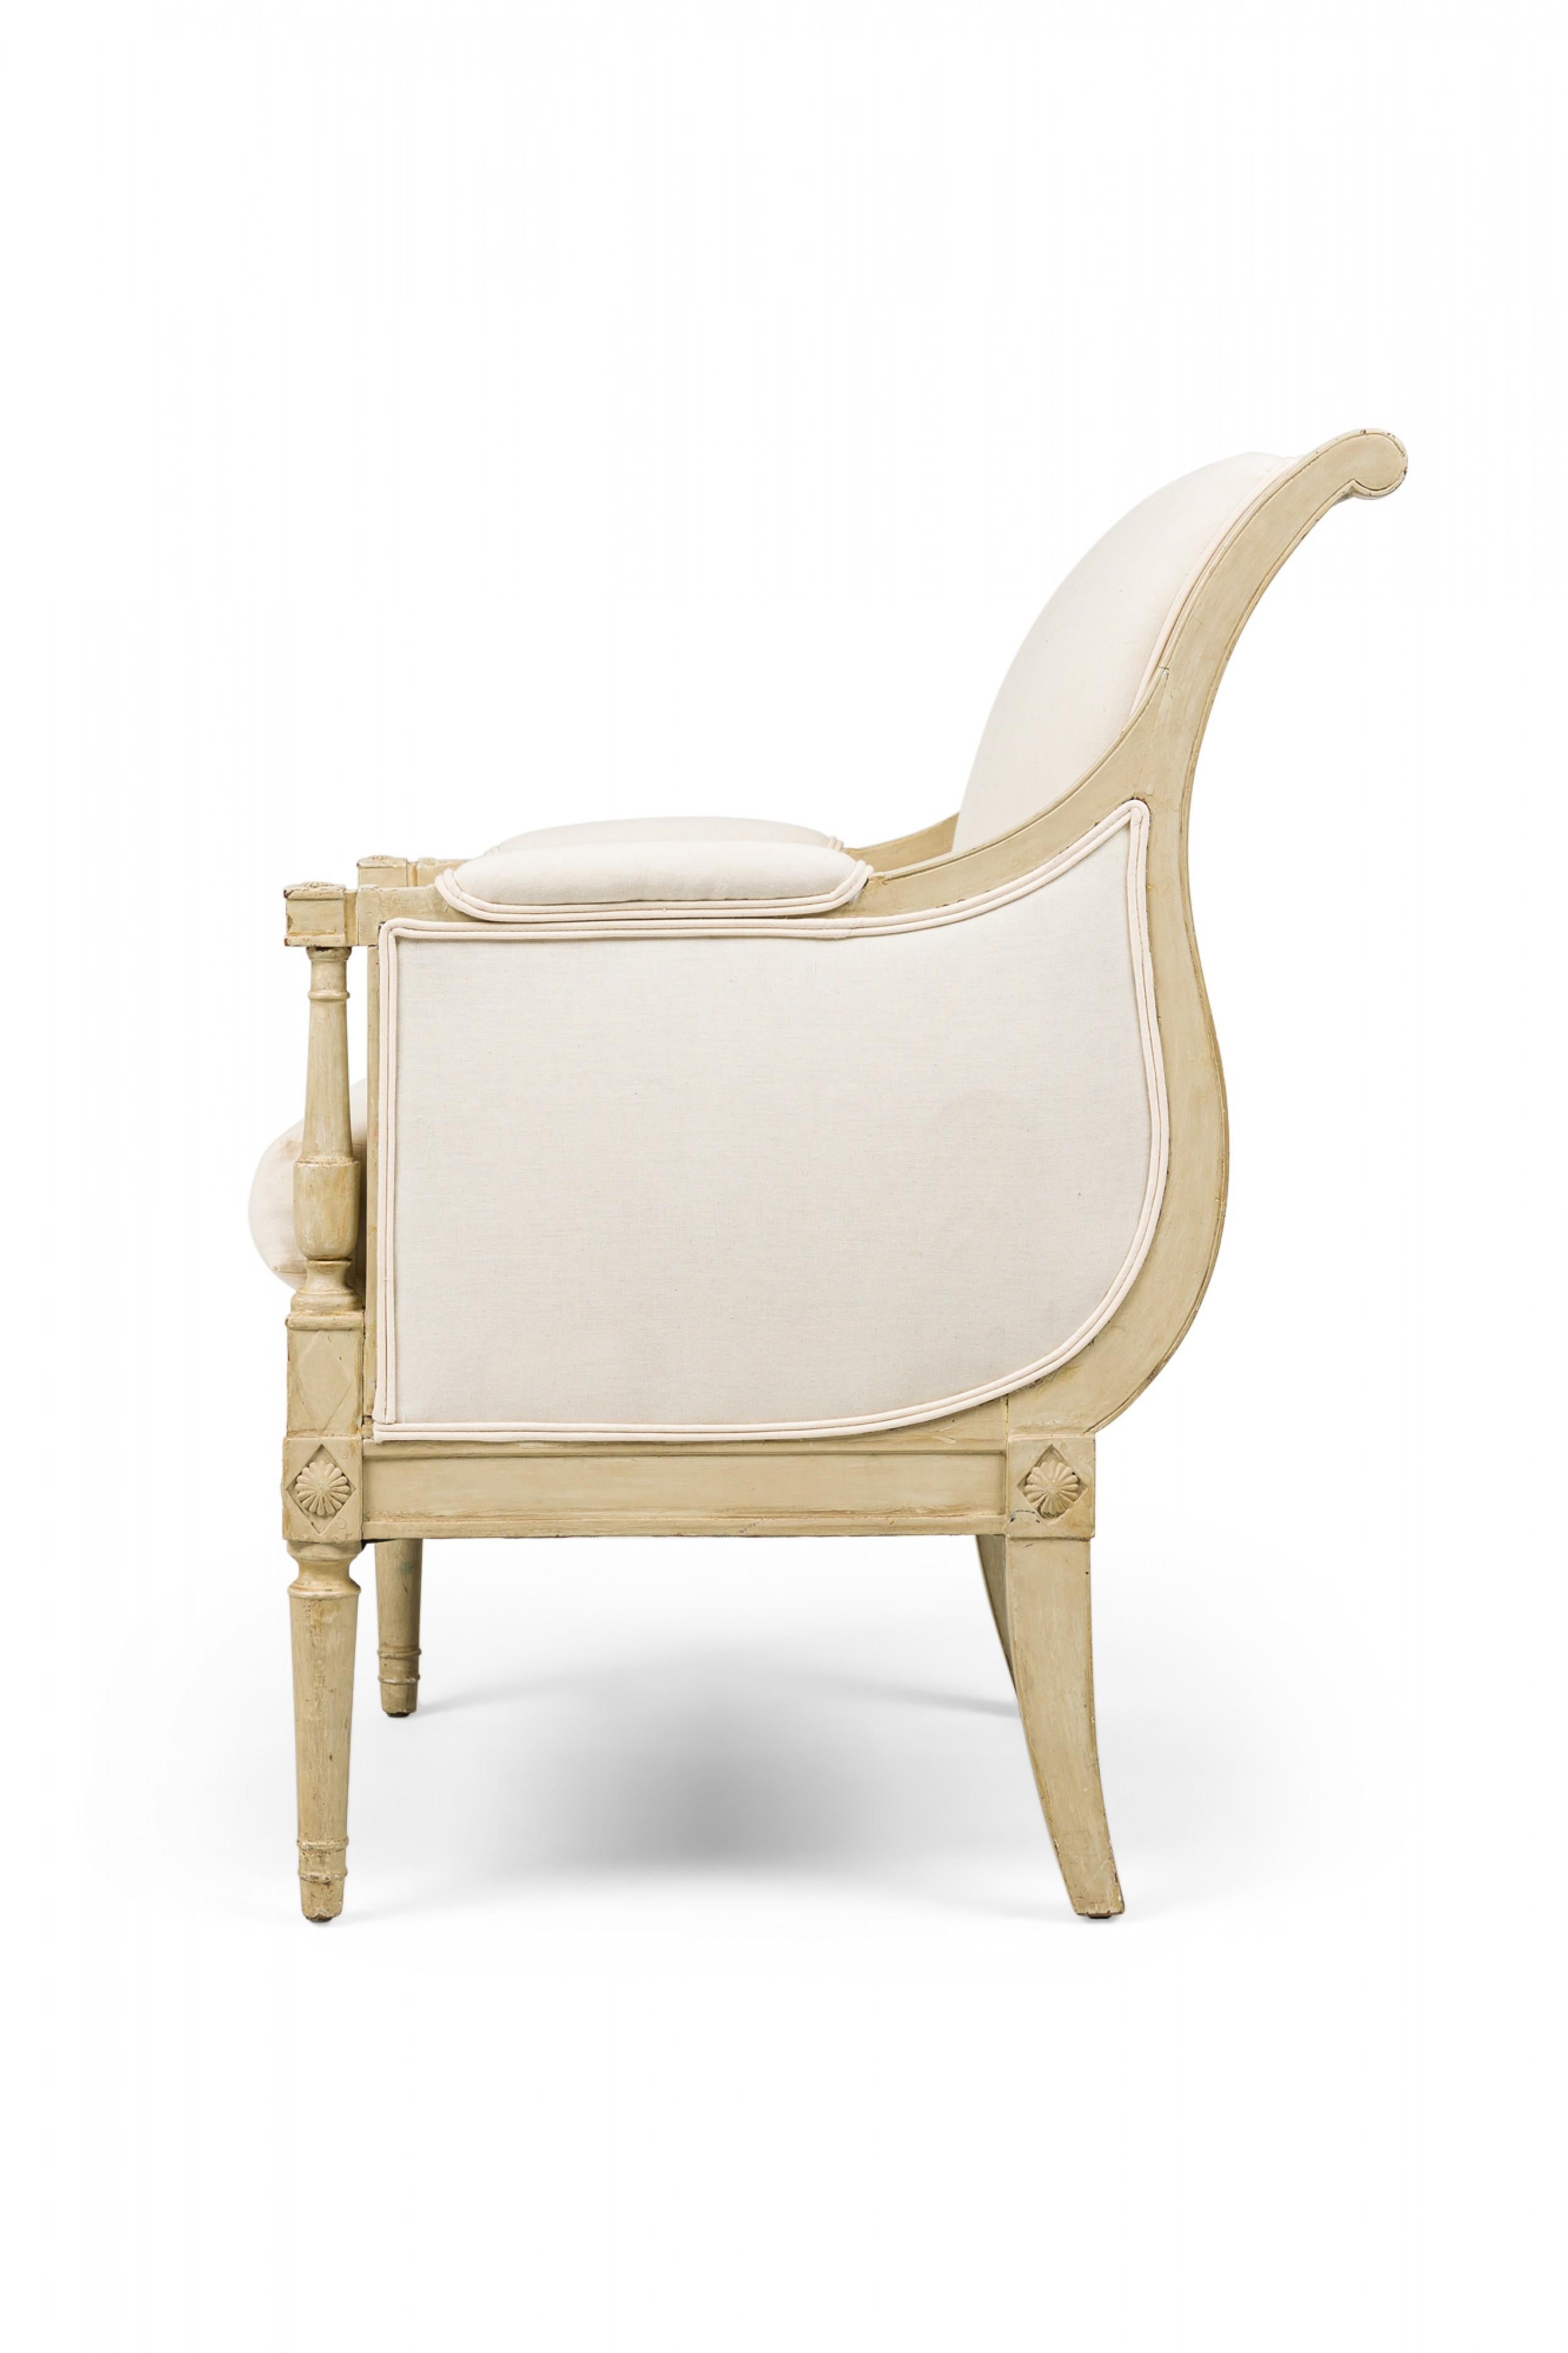 Pair of Swedish Gustavian (18/19th Century) bergere armchairs with beige painted and carved frames in Neo-classic square form upholstered in beige fabric accented by a double-piped border, resting on turned front legs and tapered squared back legs.